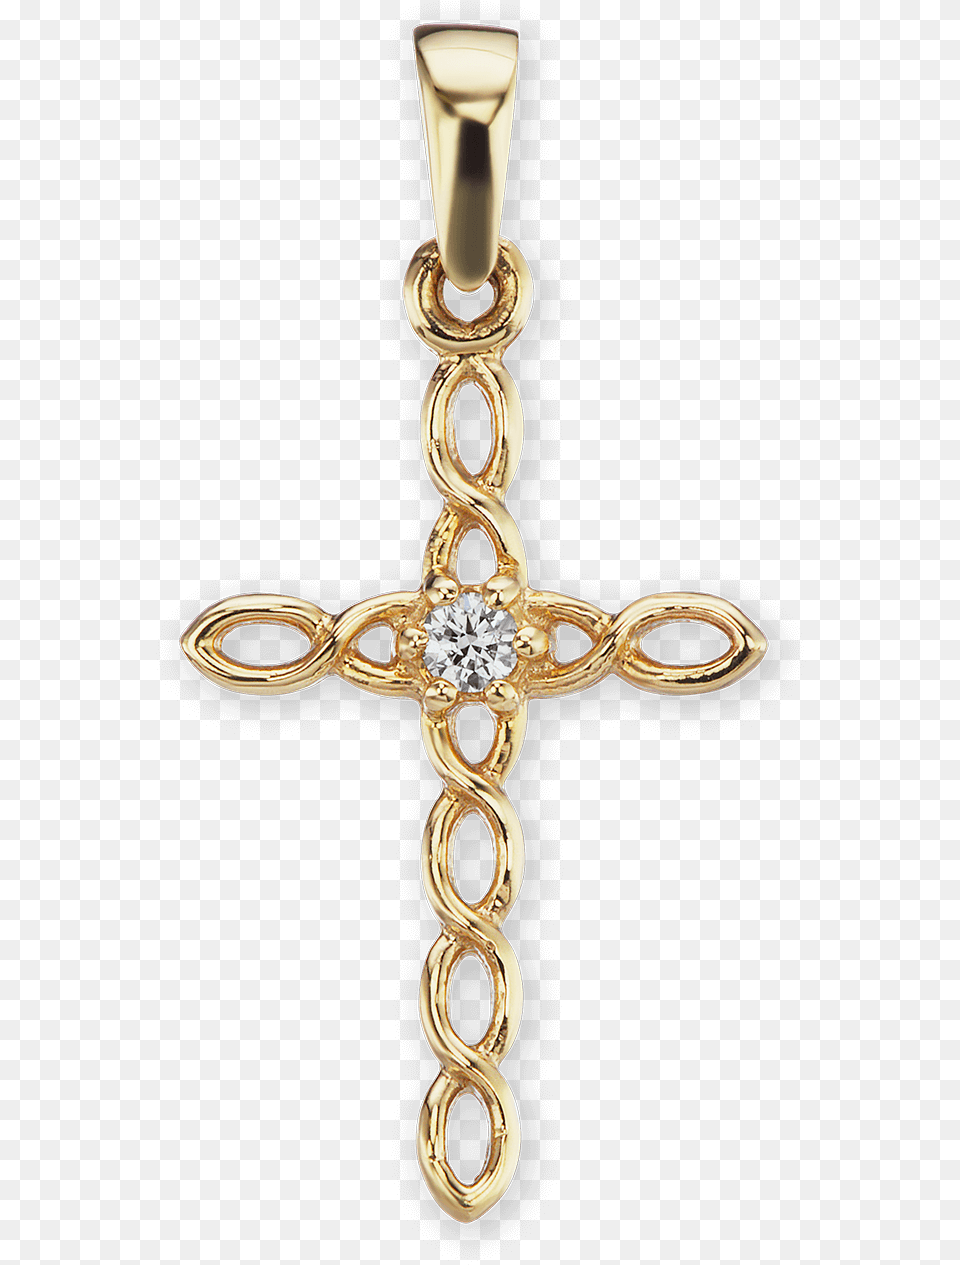 Gold Filigree Cross Pendant With Diamond Roberto Coin Cross Necklace, Symbol, Accessories Png